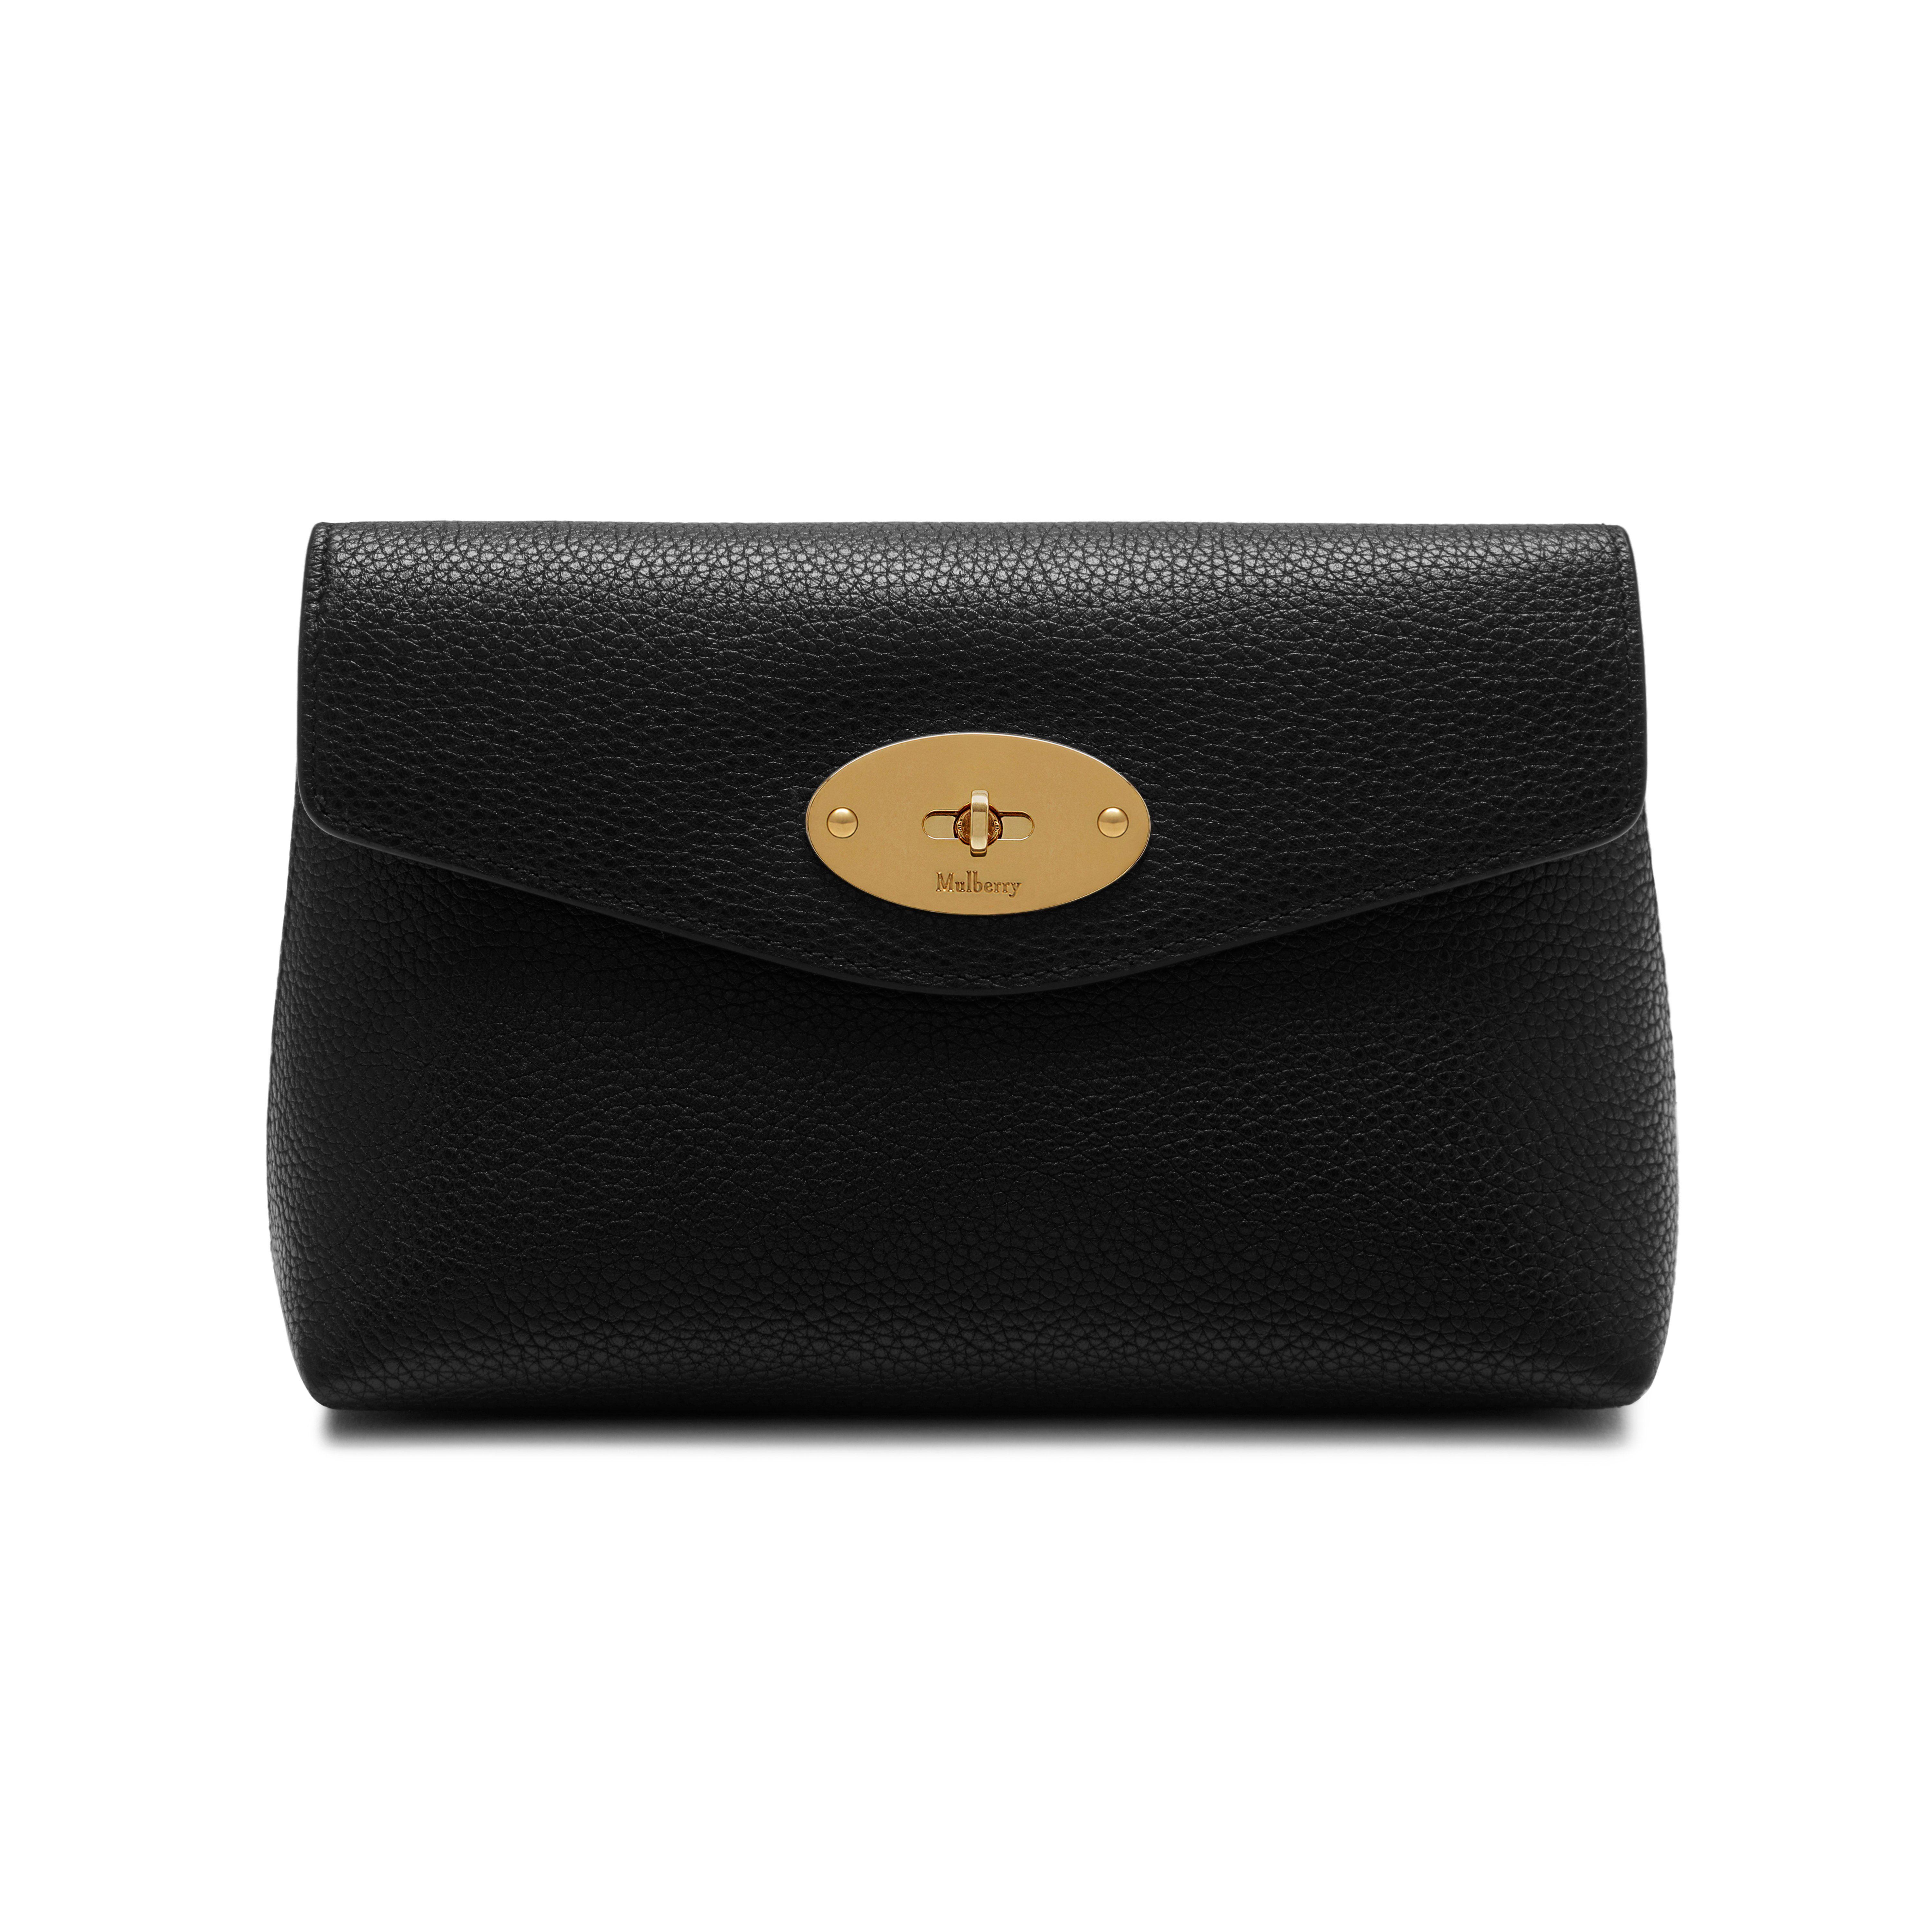 Mulberry Leather Darley Cosmetic Pouch In Black Small Classic Grain ...